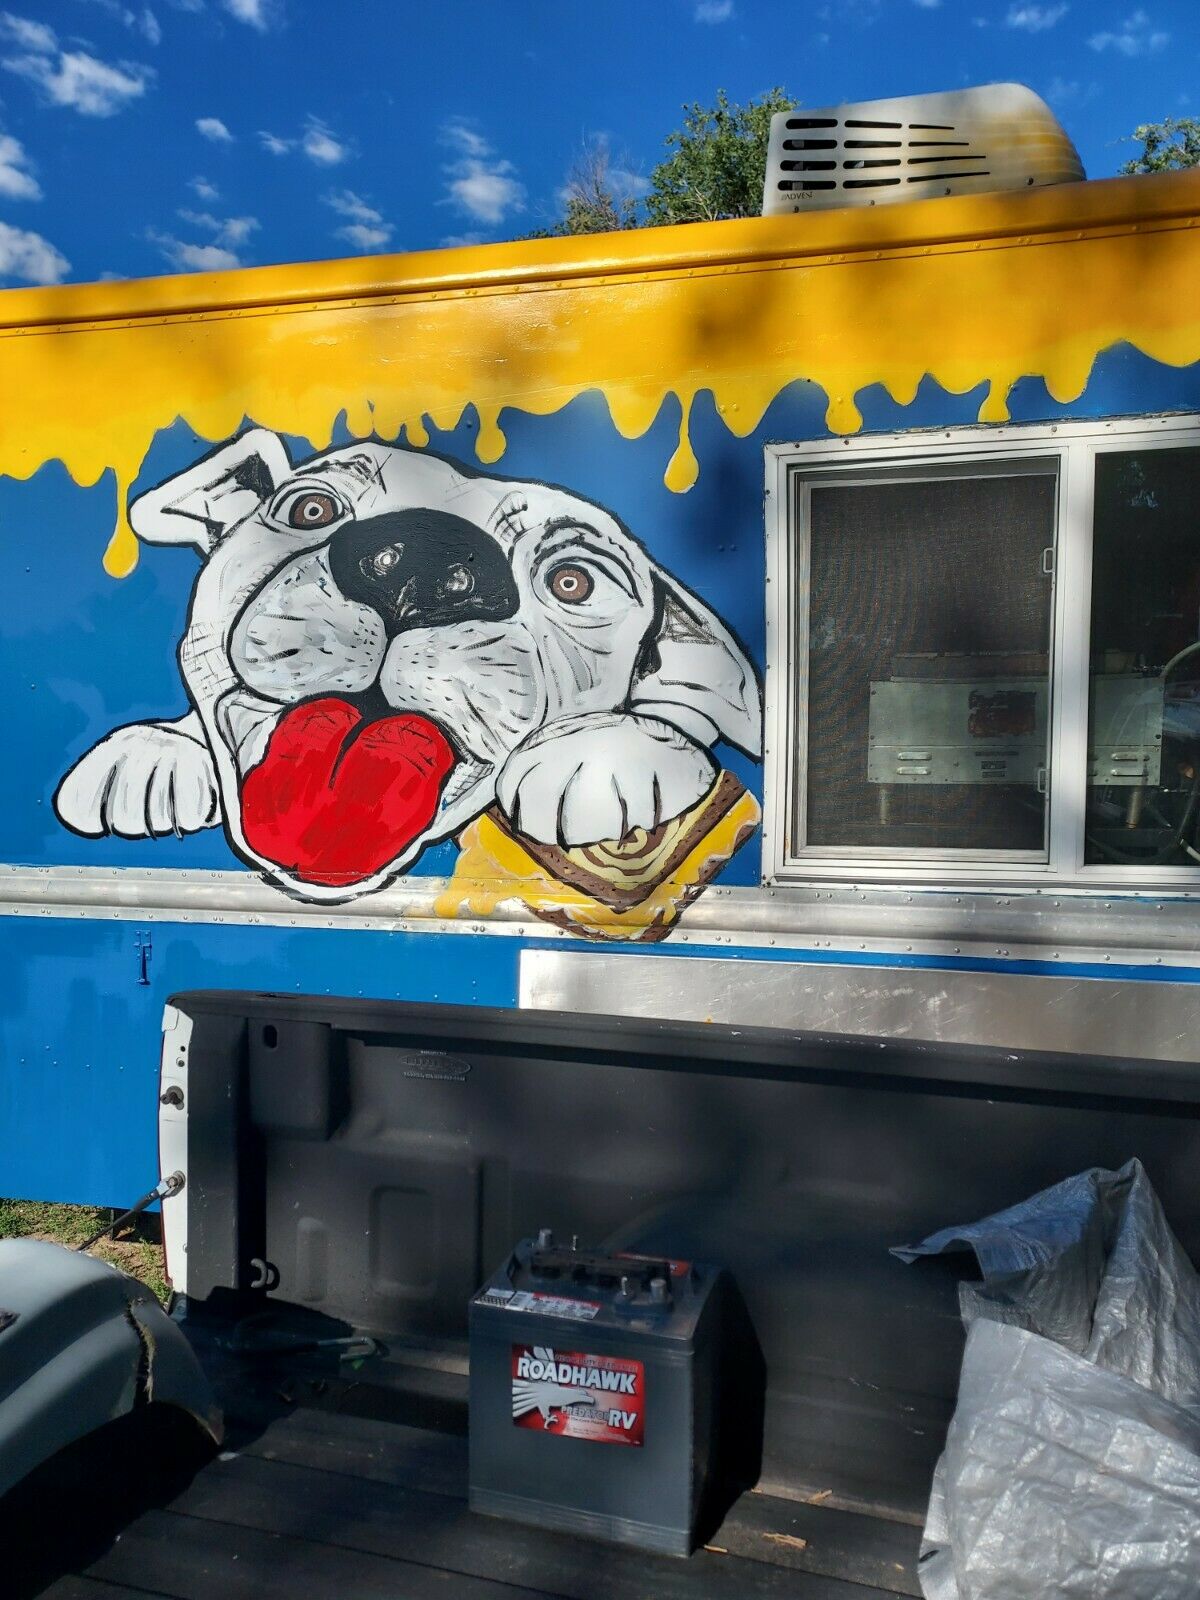 Used Mobile Food Trucks For Sale